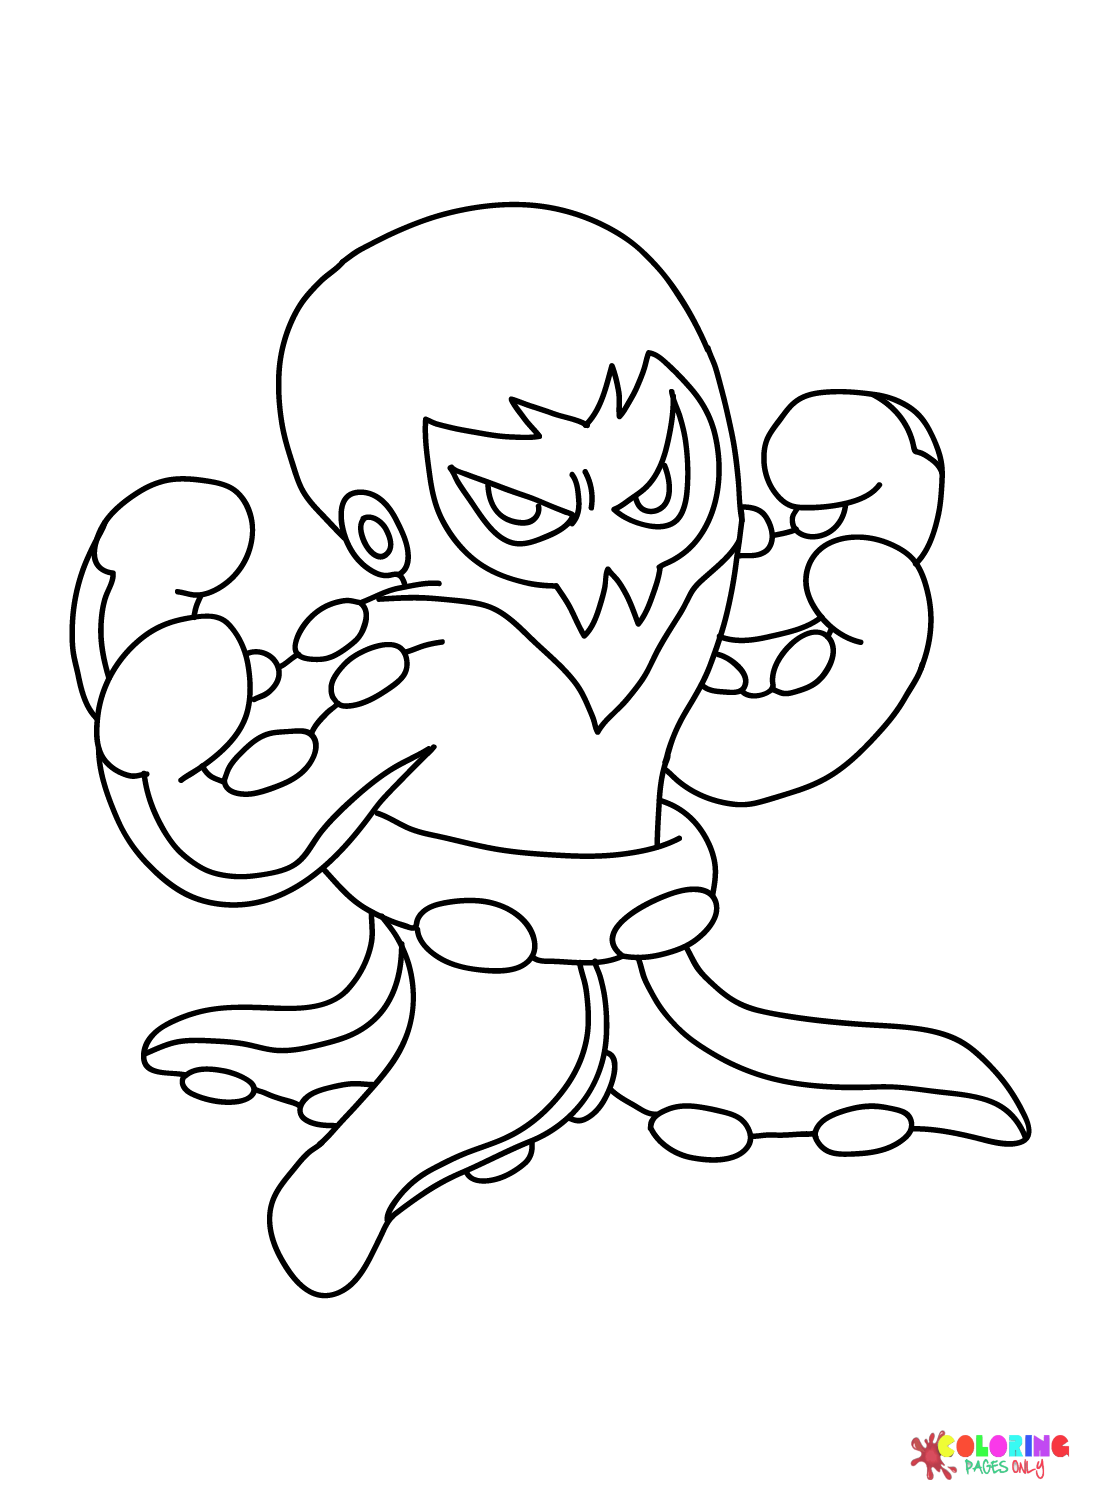 Pokemon Grapploct Coloring Pages Free Printable Coloring Pages